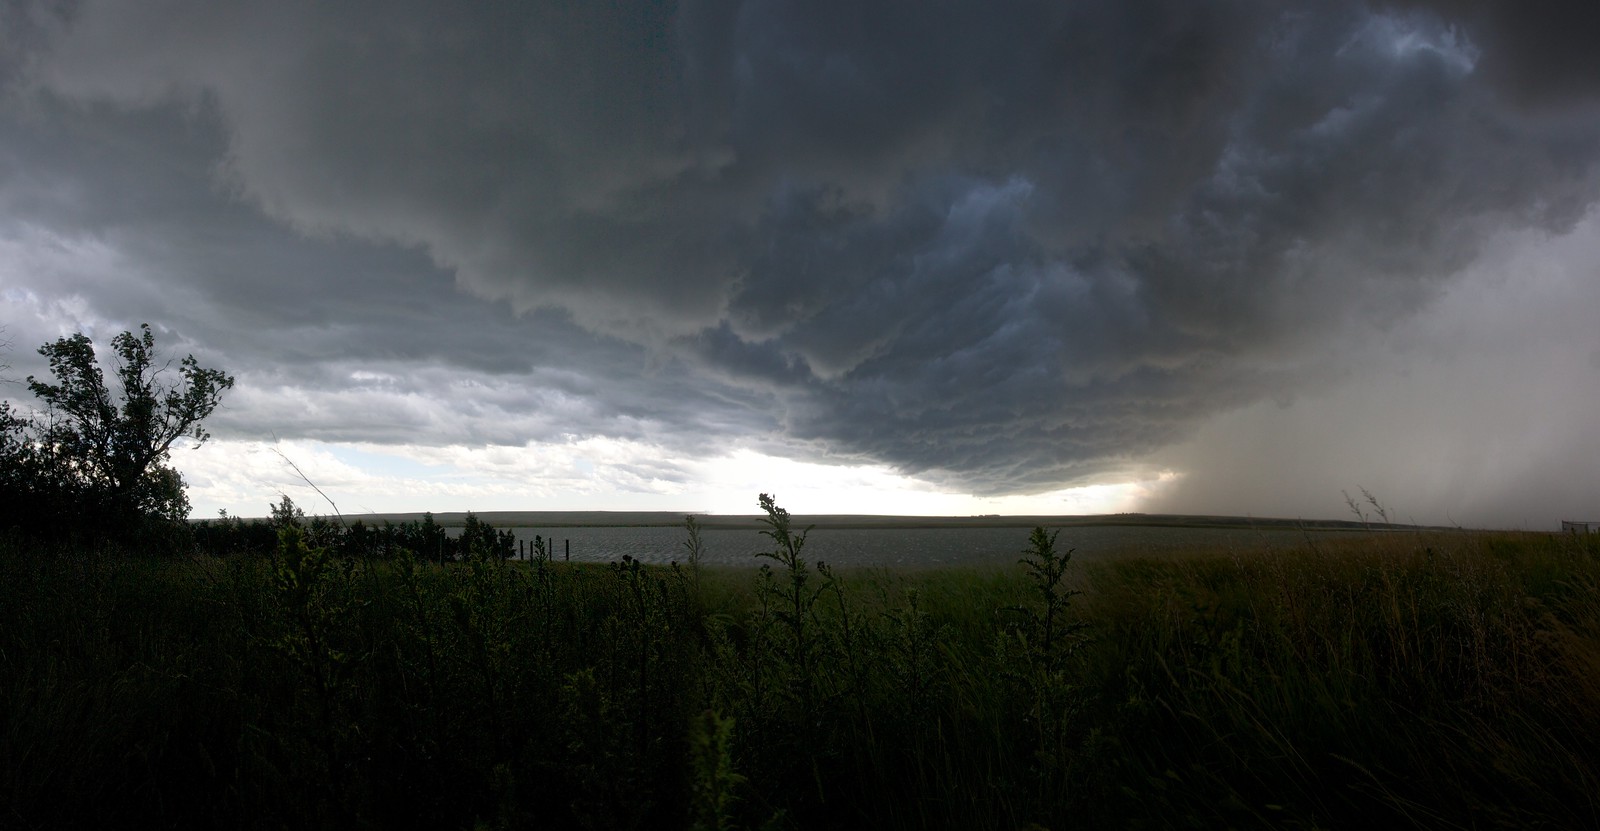 Approaching Thunder- Unlike many other parts of our Nation, where skyscape views are obstructed by trees, mountains, and higher-density land uses, in the the Northern Prairie one can see whole storm fronts advancing | Medicine Lake NWR Storm